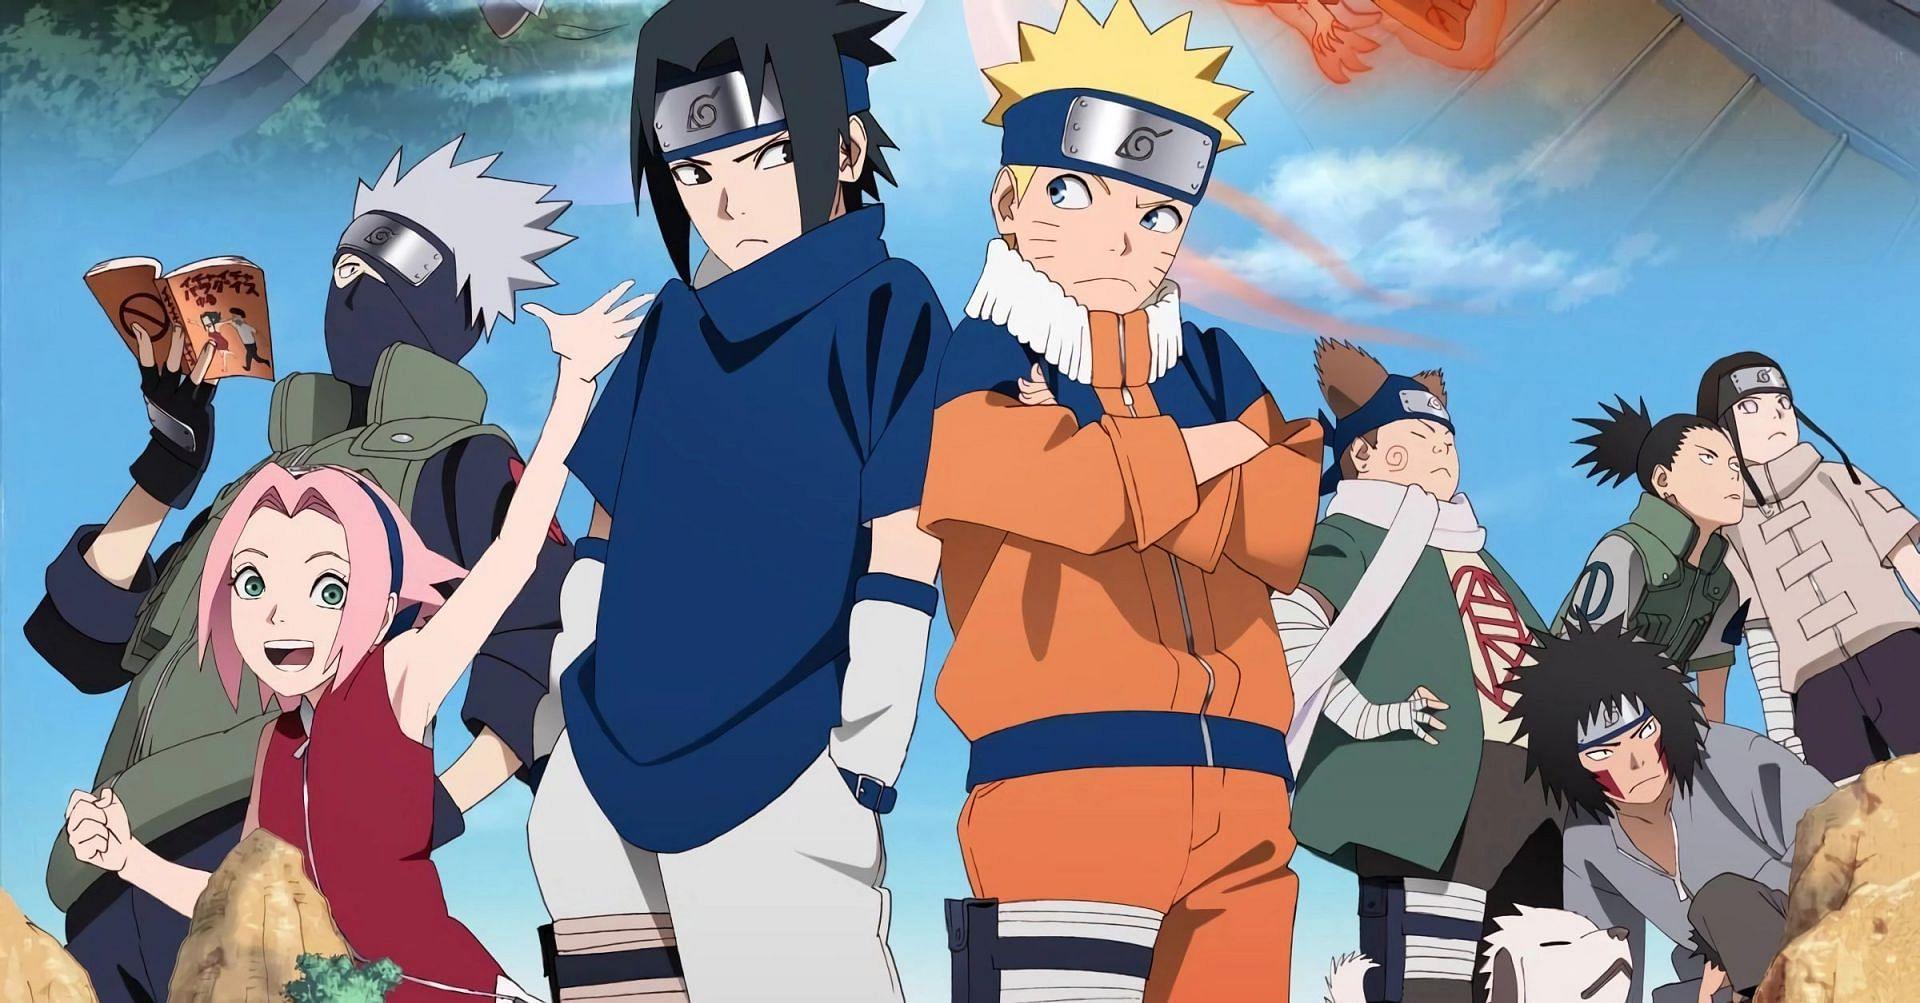 BirtHDays Of Top Popular Characters In The Naruto Universe